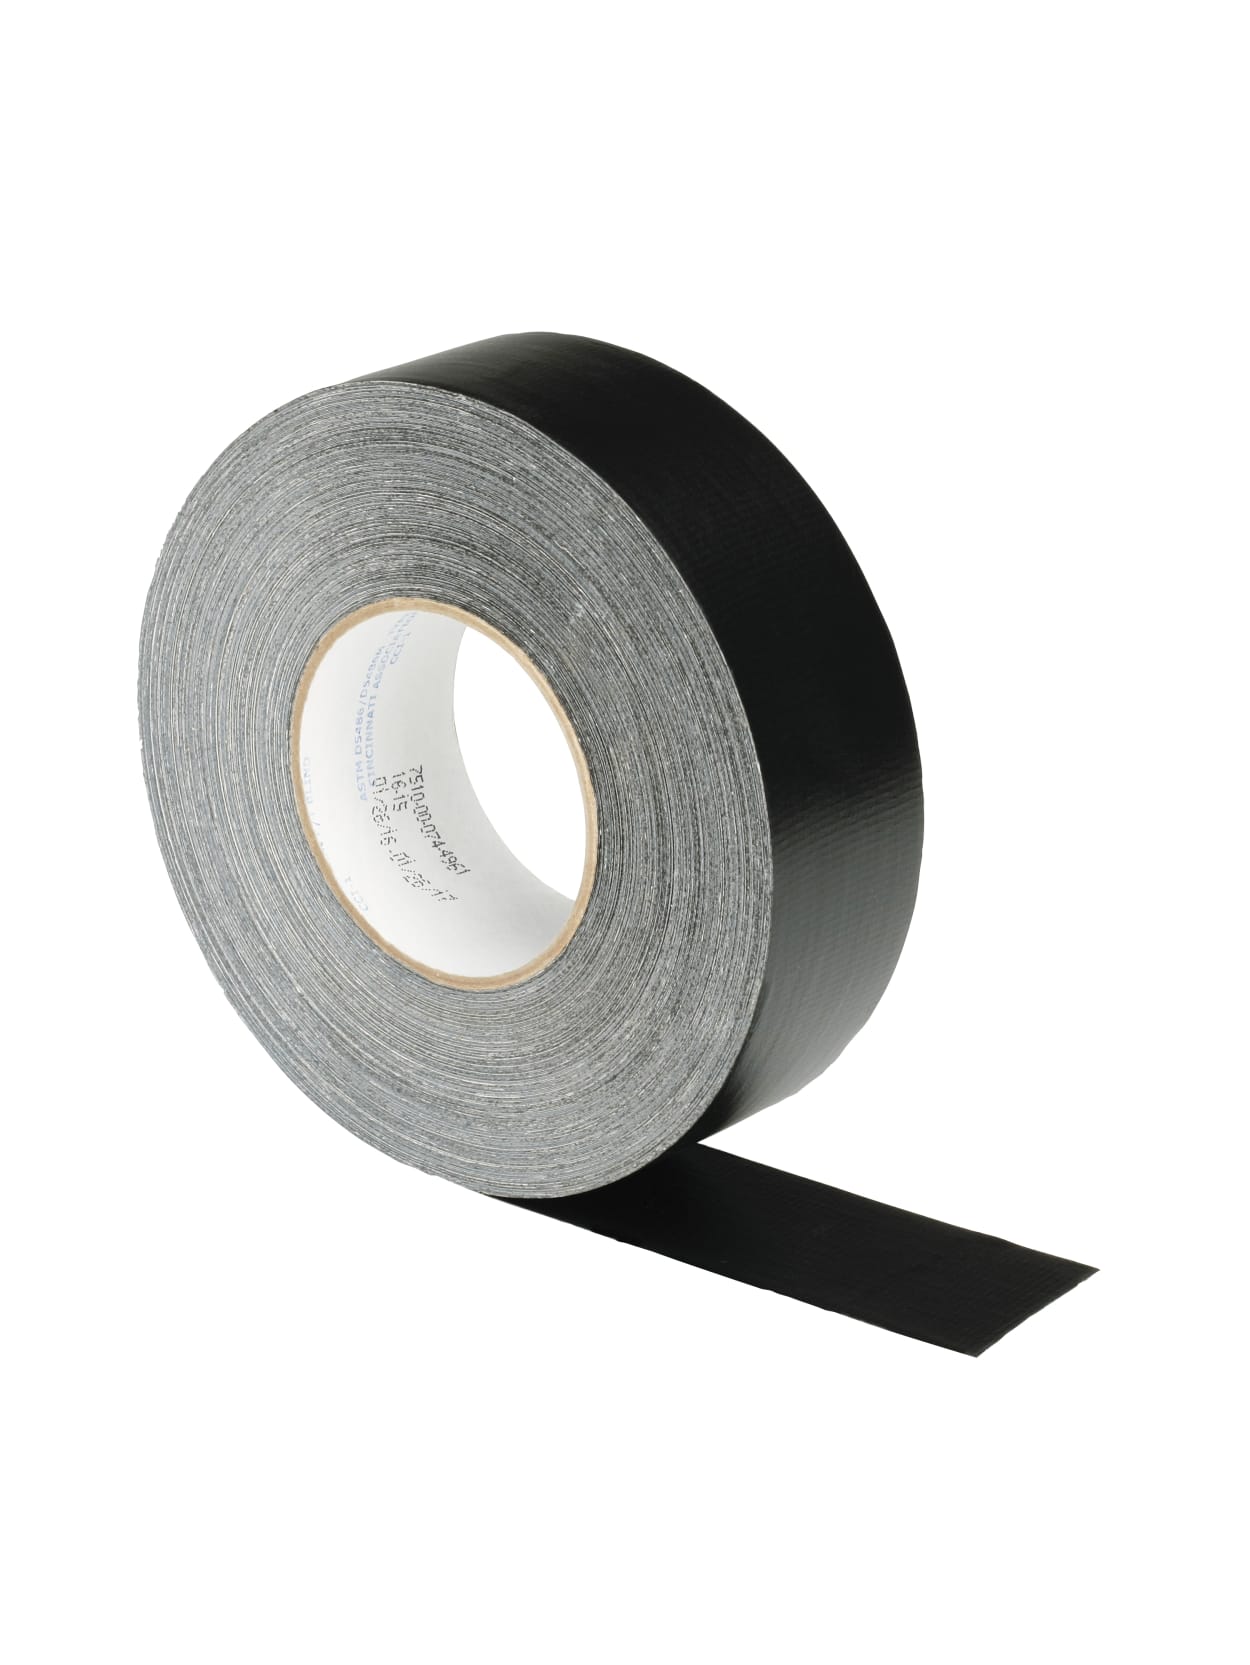 10m Black Duct Tape Strong Textile Fabric Tape Strong Waterproof Mending TapeBla 